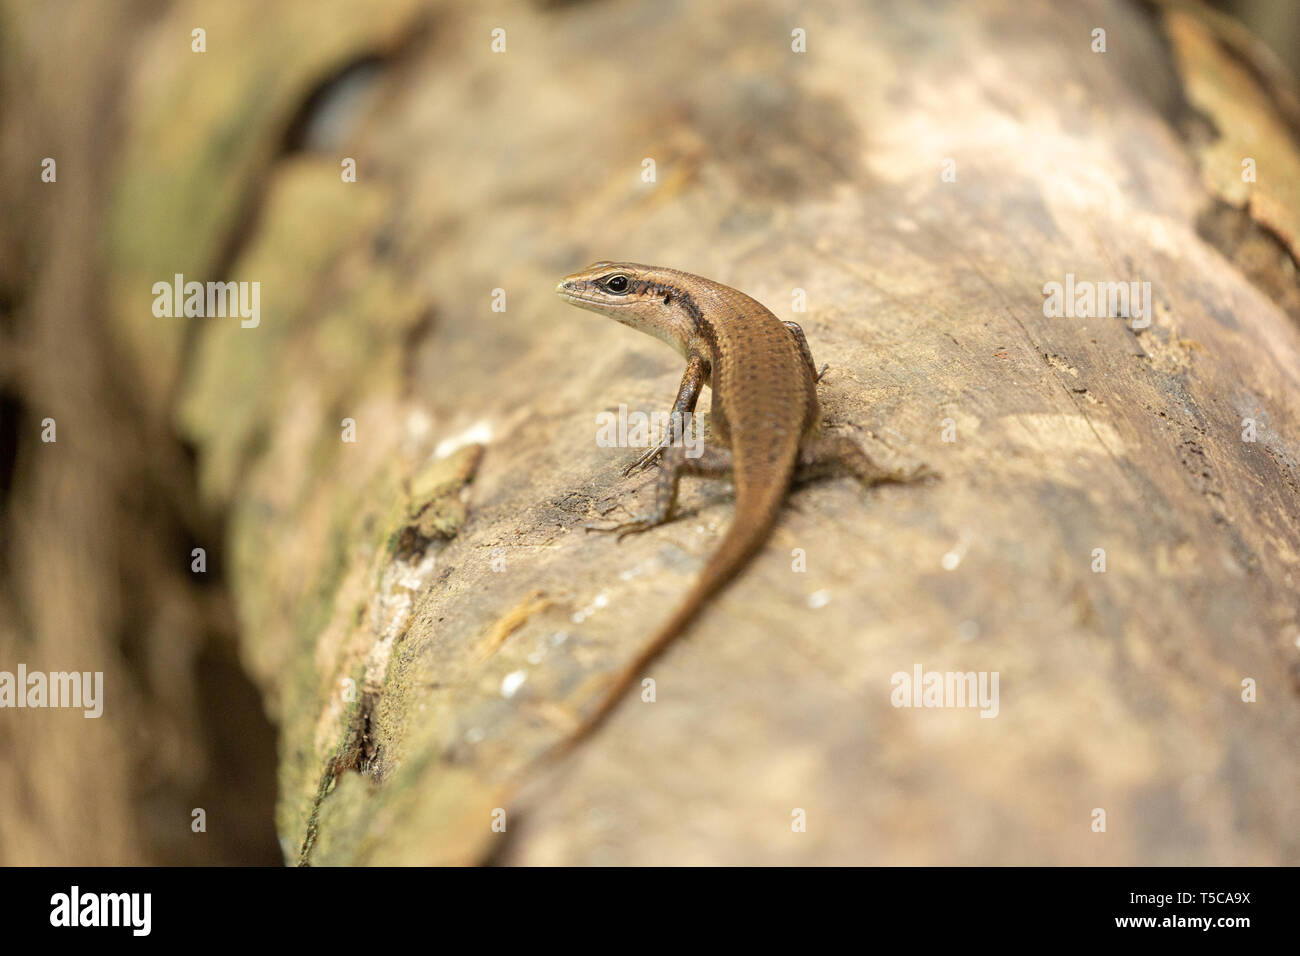 Lizard skink perched on a branch Stock Photo